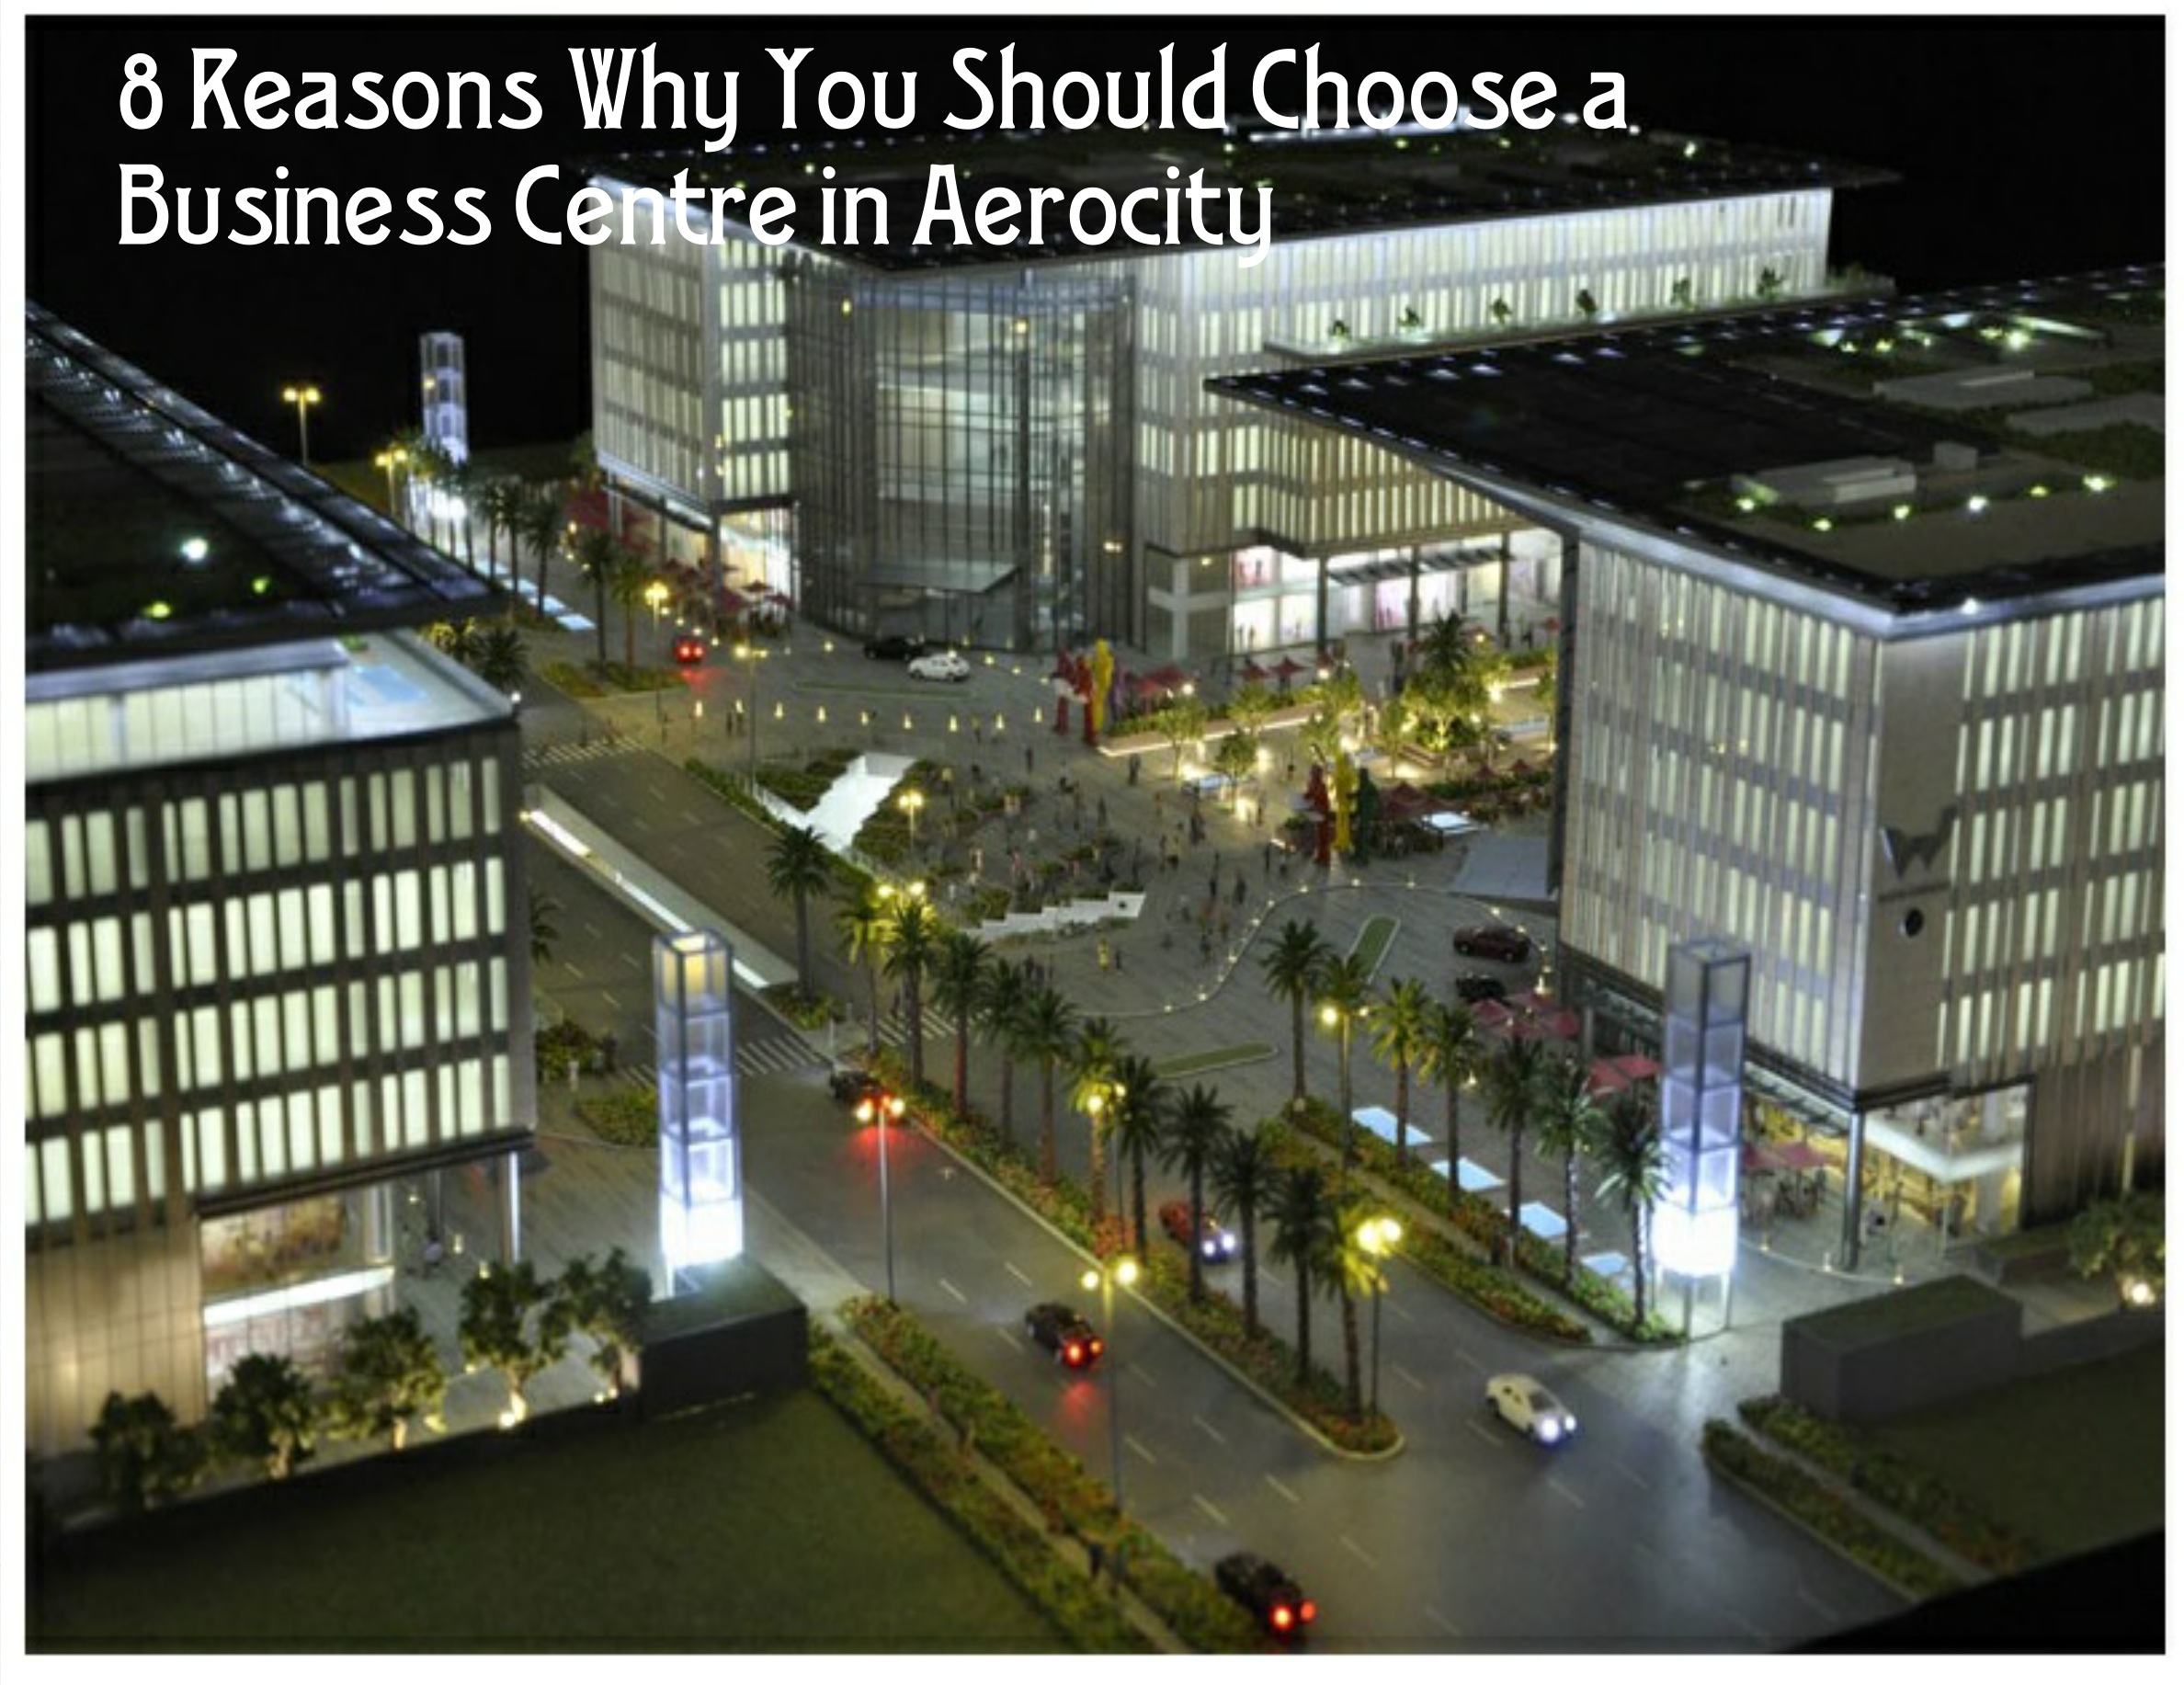 8 Reasons Why You Should Choose a Business Centre in Aerocity